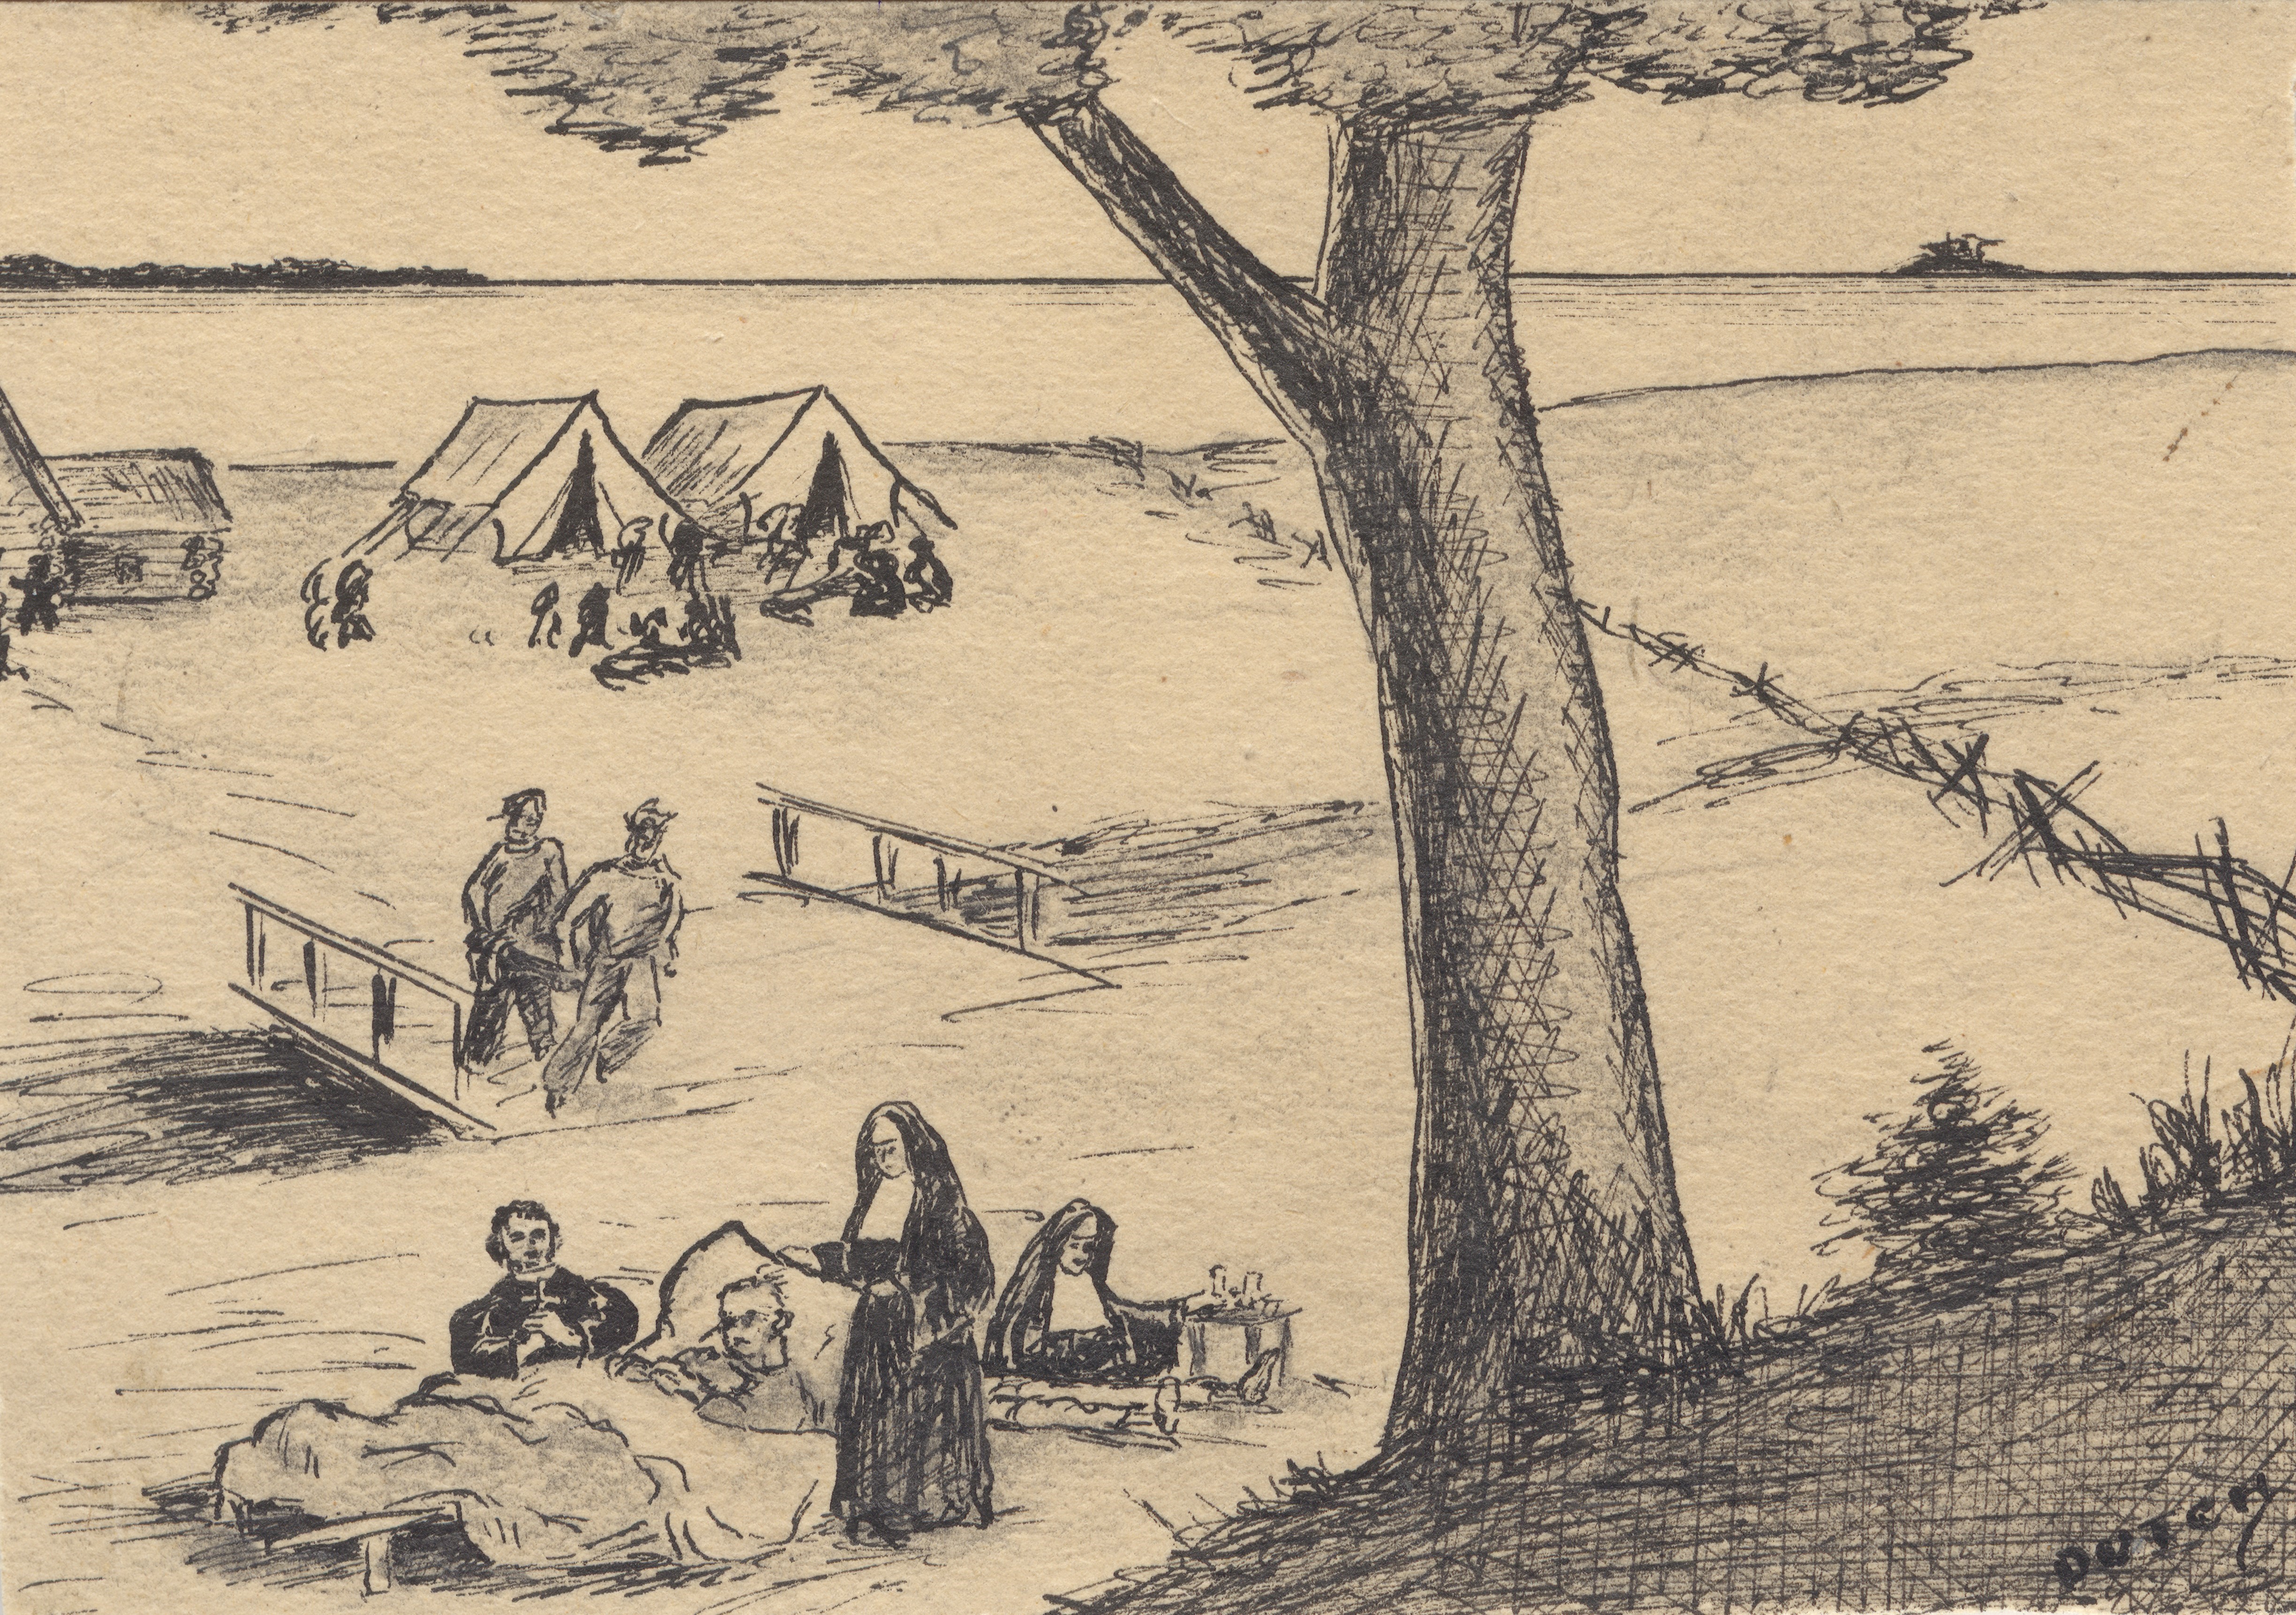 Nun in habit leaning over sick man in bed in open air, priest kneeling at his side, a second nun sitting at a small table preparing medicine, a bridge, tents, and sheds in the background with other people on the shoreline of a large lake. Large tree in foreground.